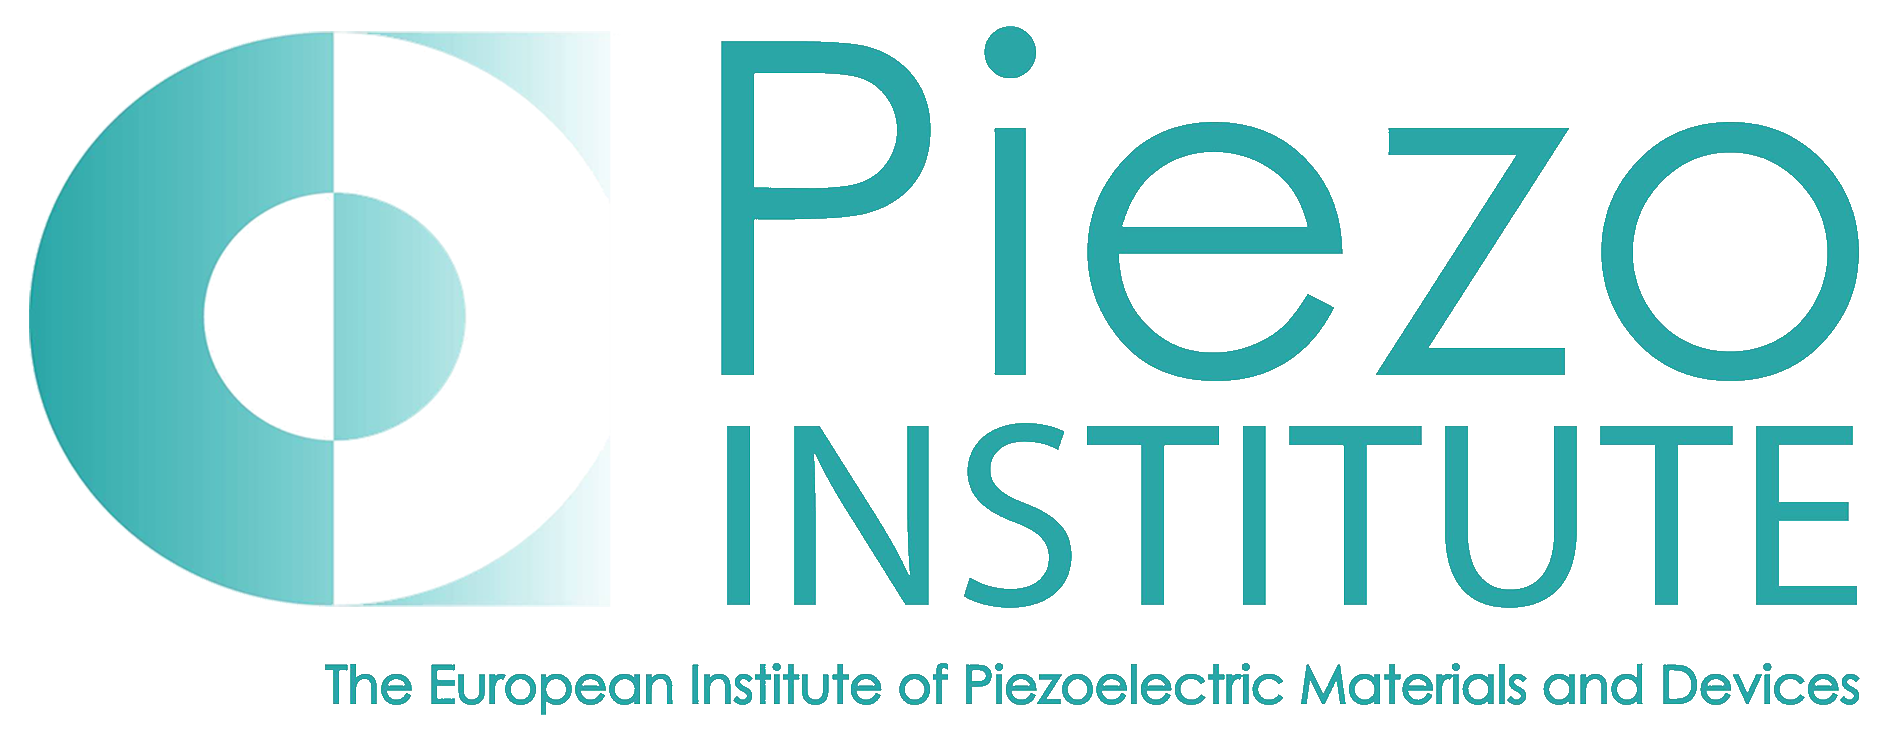 PIEZO2023 with Ferroelectrics UK: Conference registration closes 23rd October 09:00!